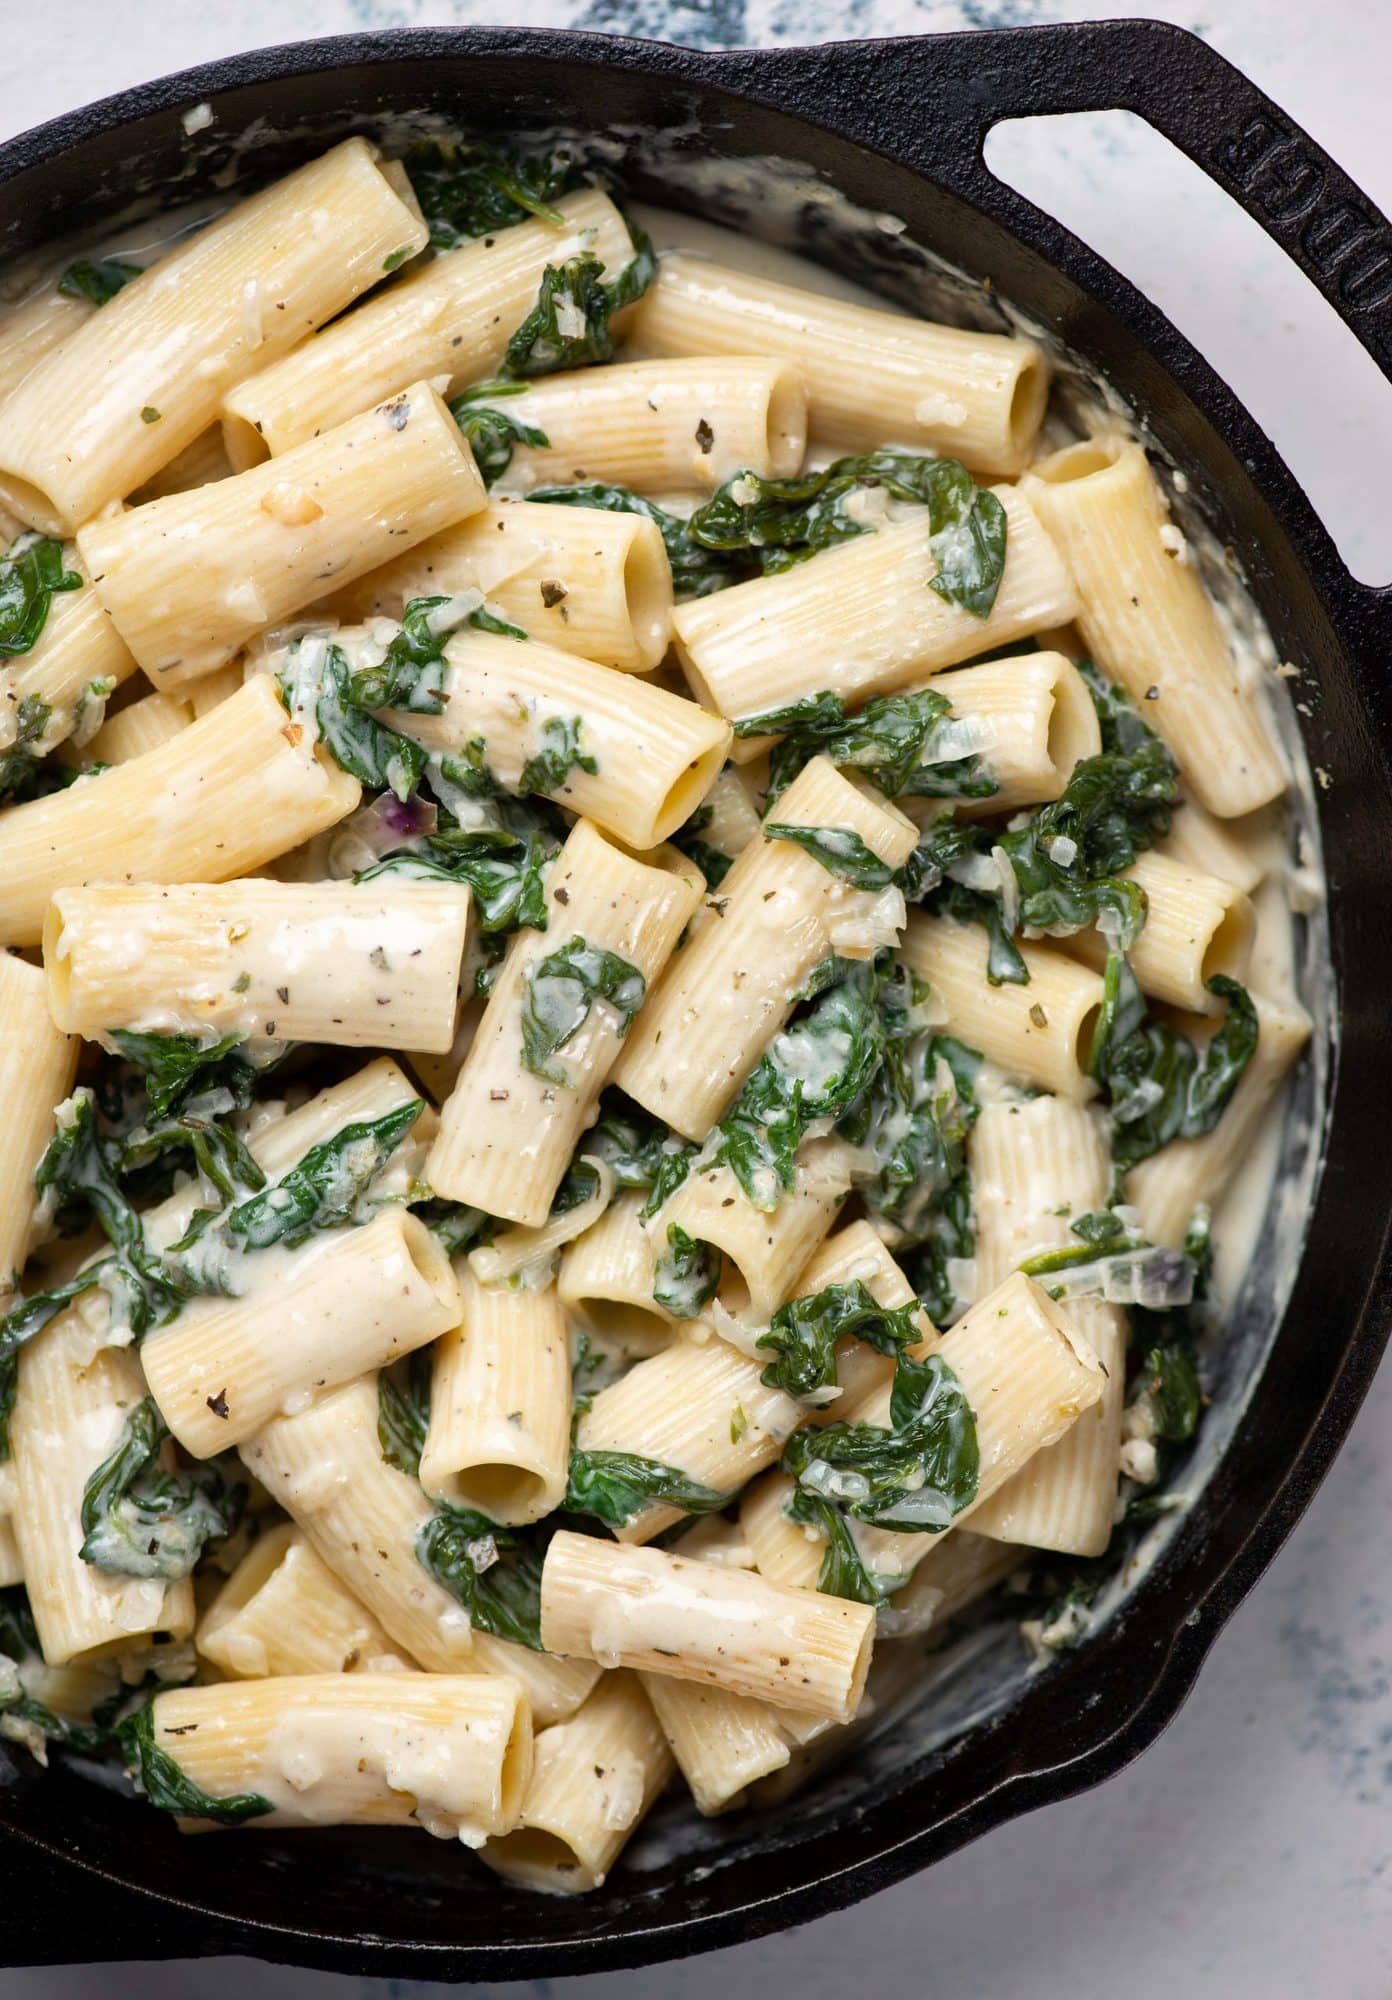 Creamy spinach pasta made with lots of creamy sauce and healthy